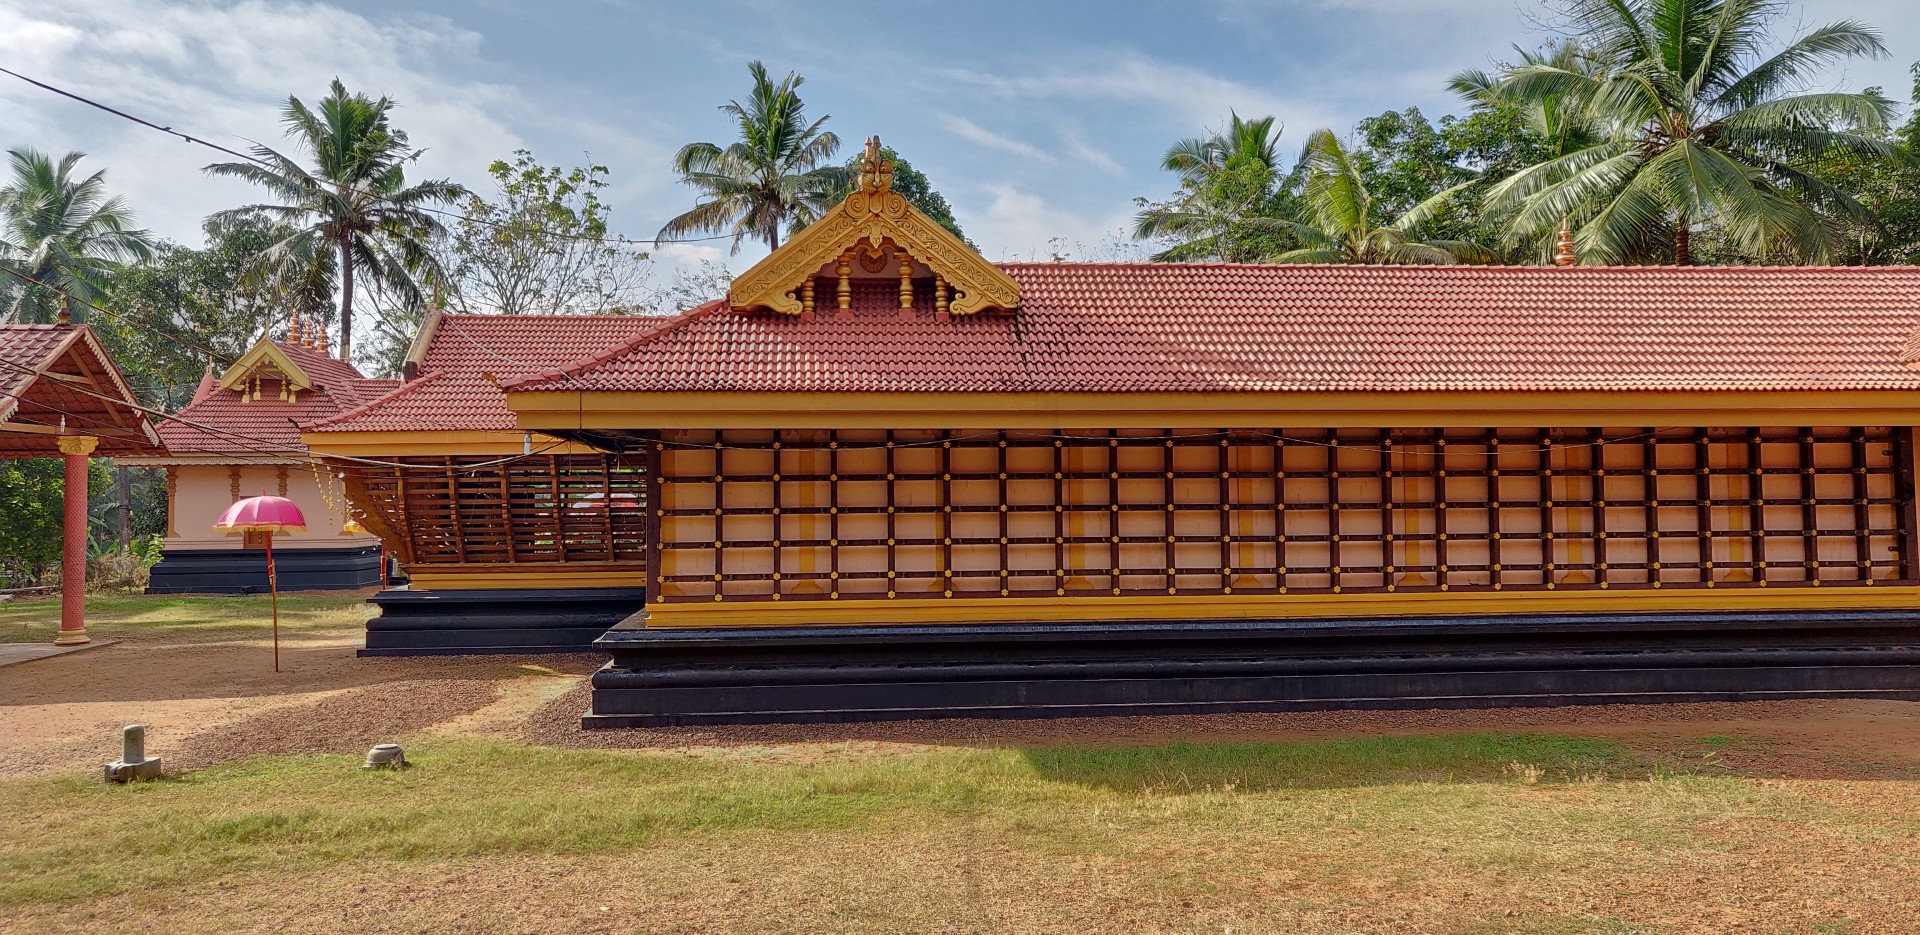 historical monuments in kerala